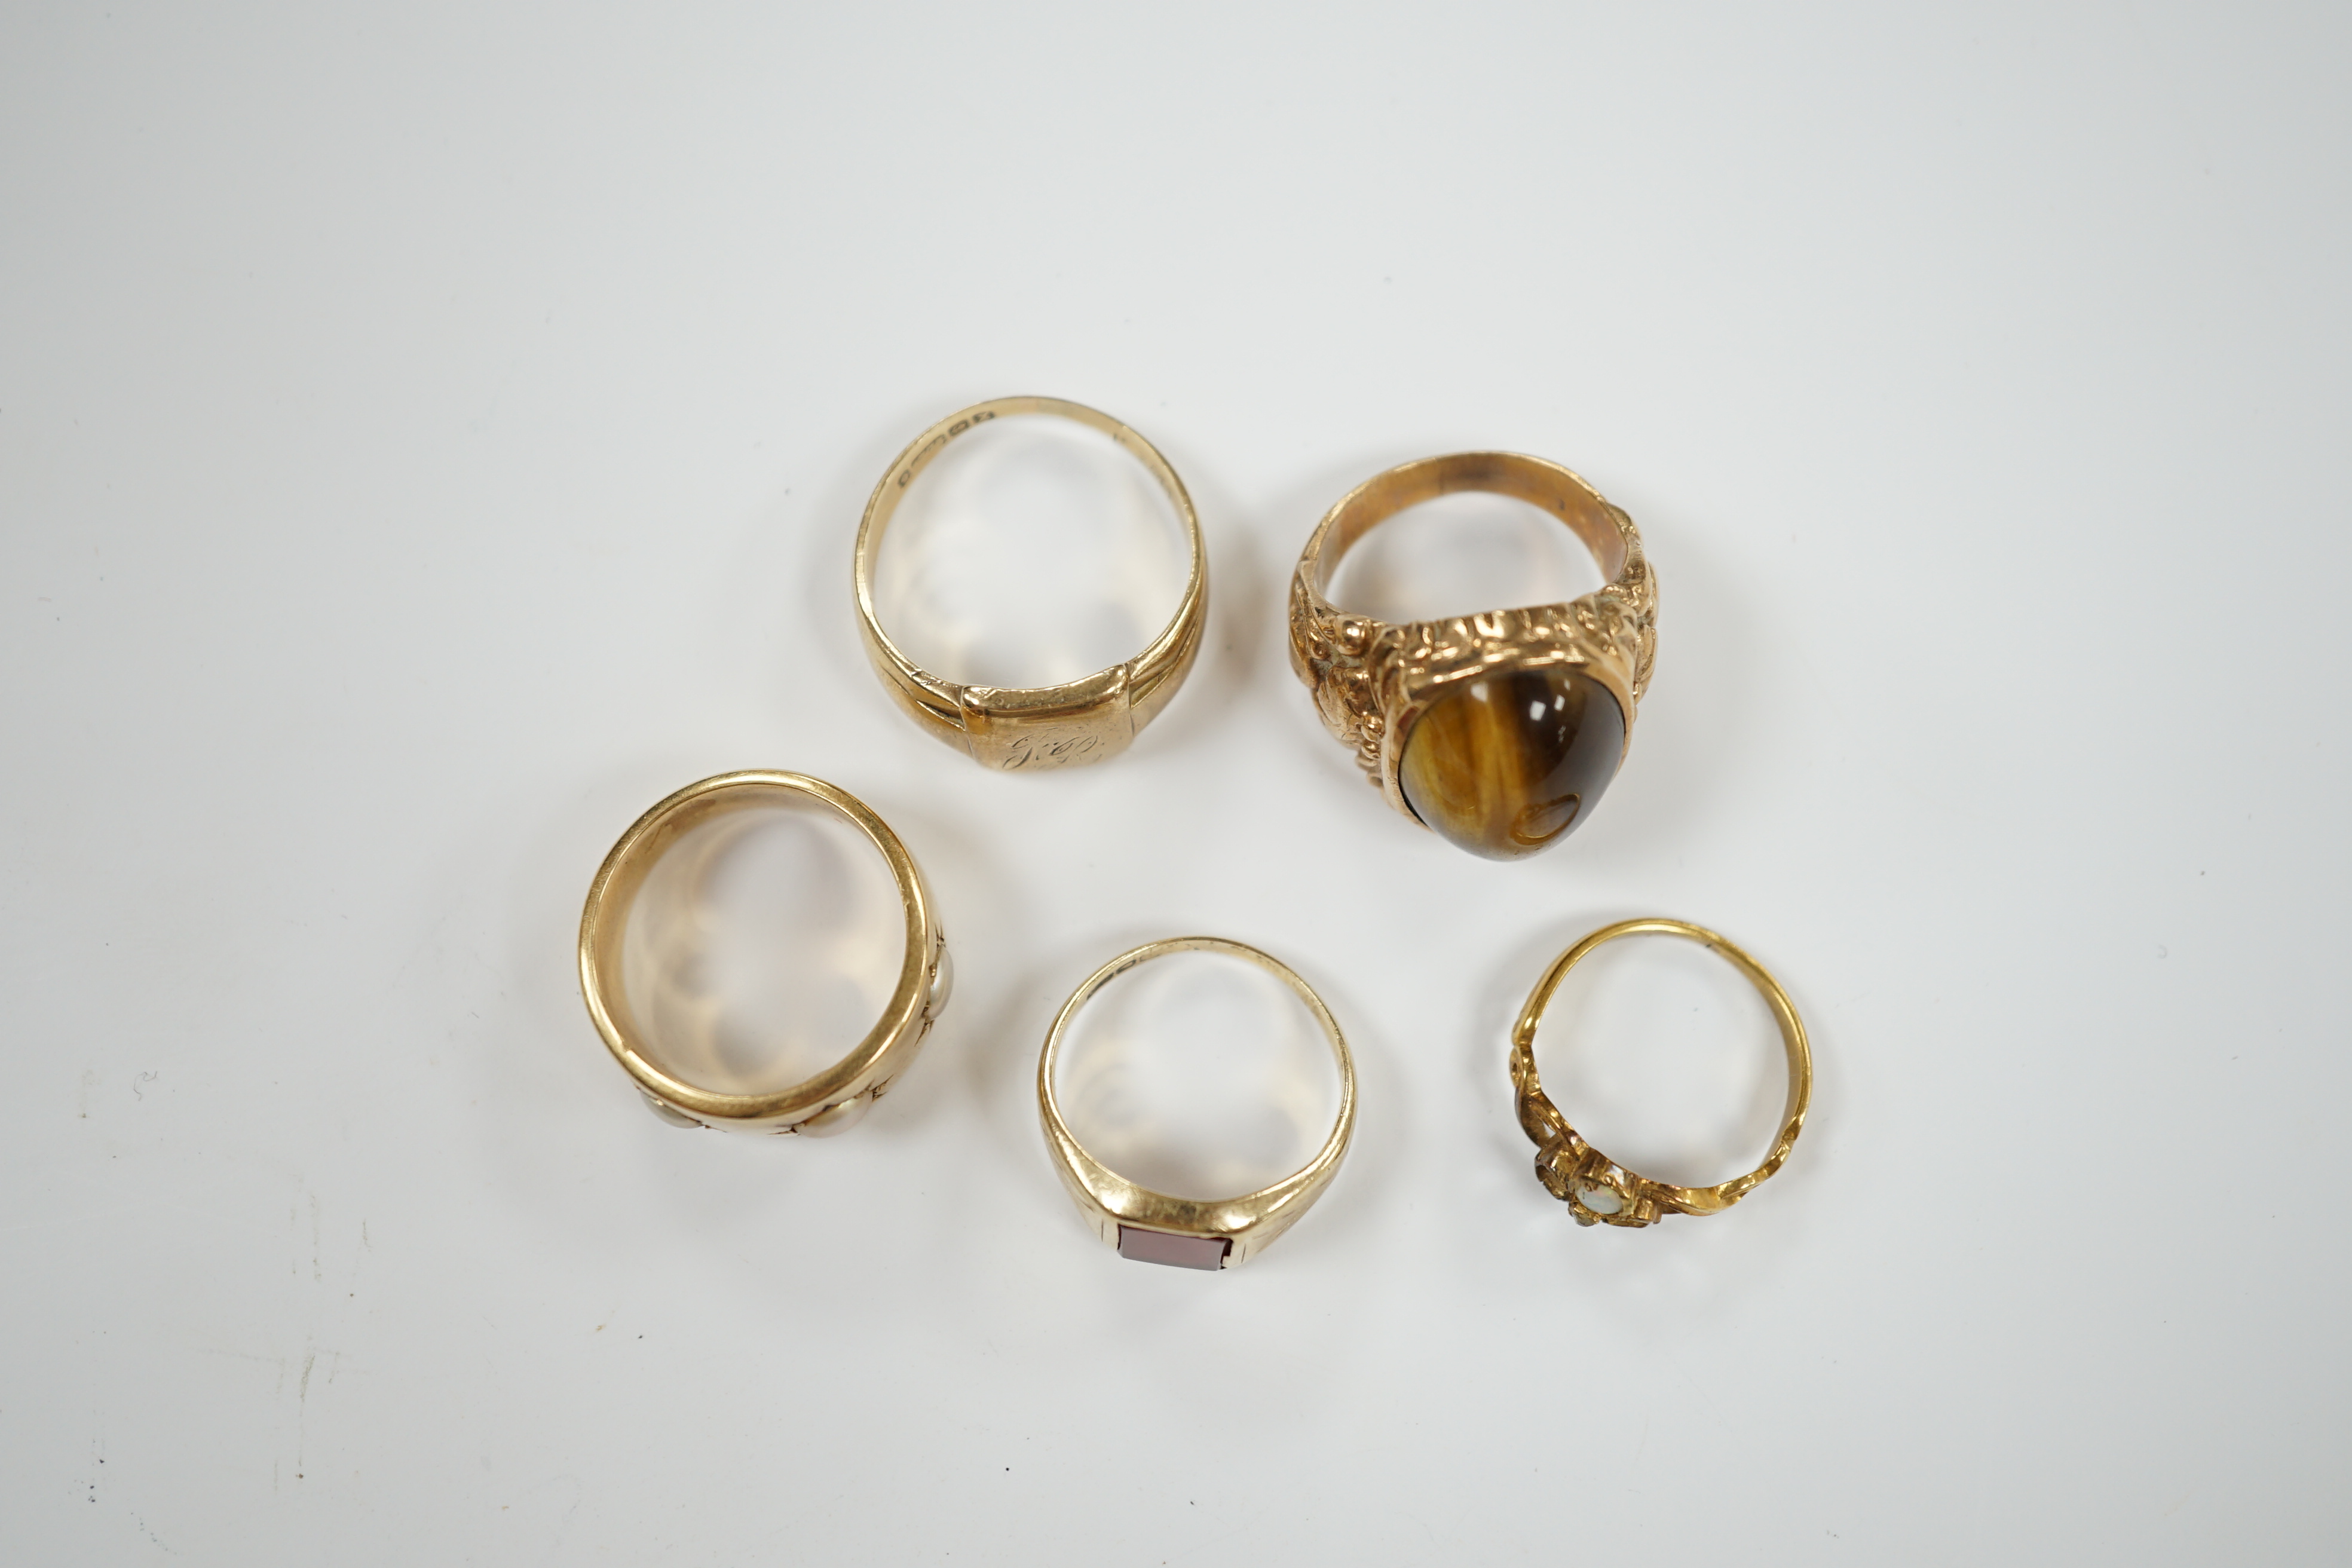 A 9ct gold signet ring, a gold and carnelian set signet ring and three yellow metal rings one set with three split pearls and one set with tiger's eye quartz cabochon, gross weight 29.7 grams.